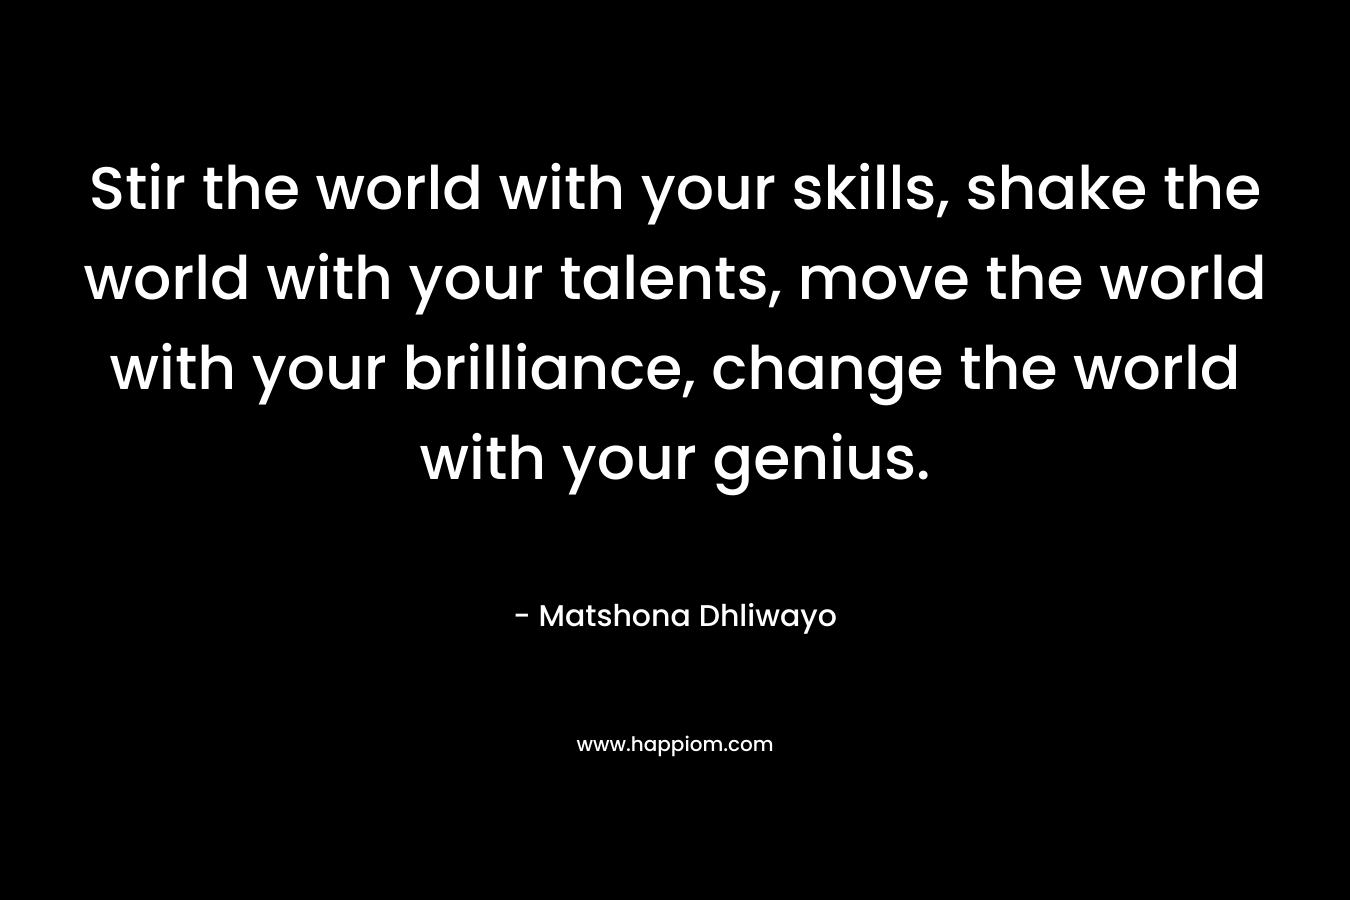 Stir the world with your skills, shake the world with your talents, move the world with your brilliance, change the world with your genius.